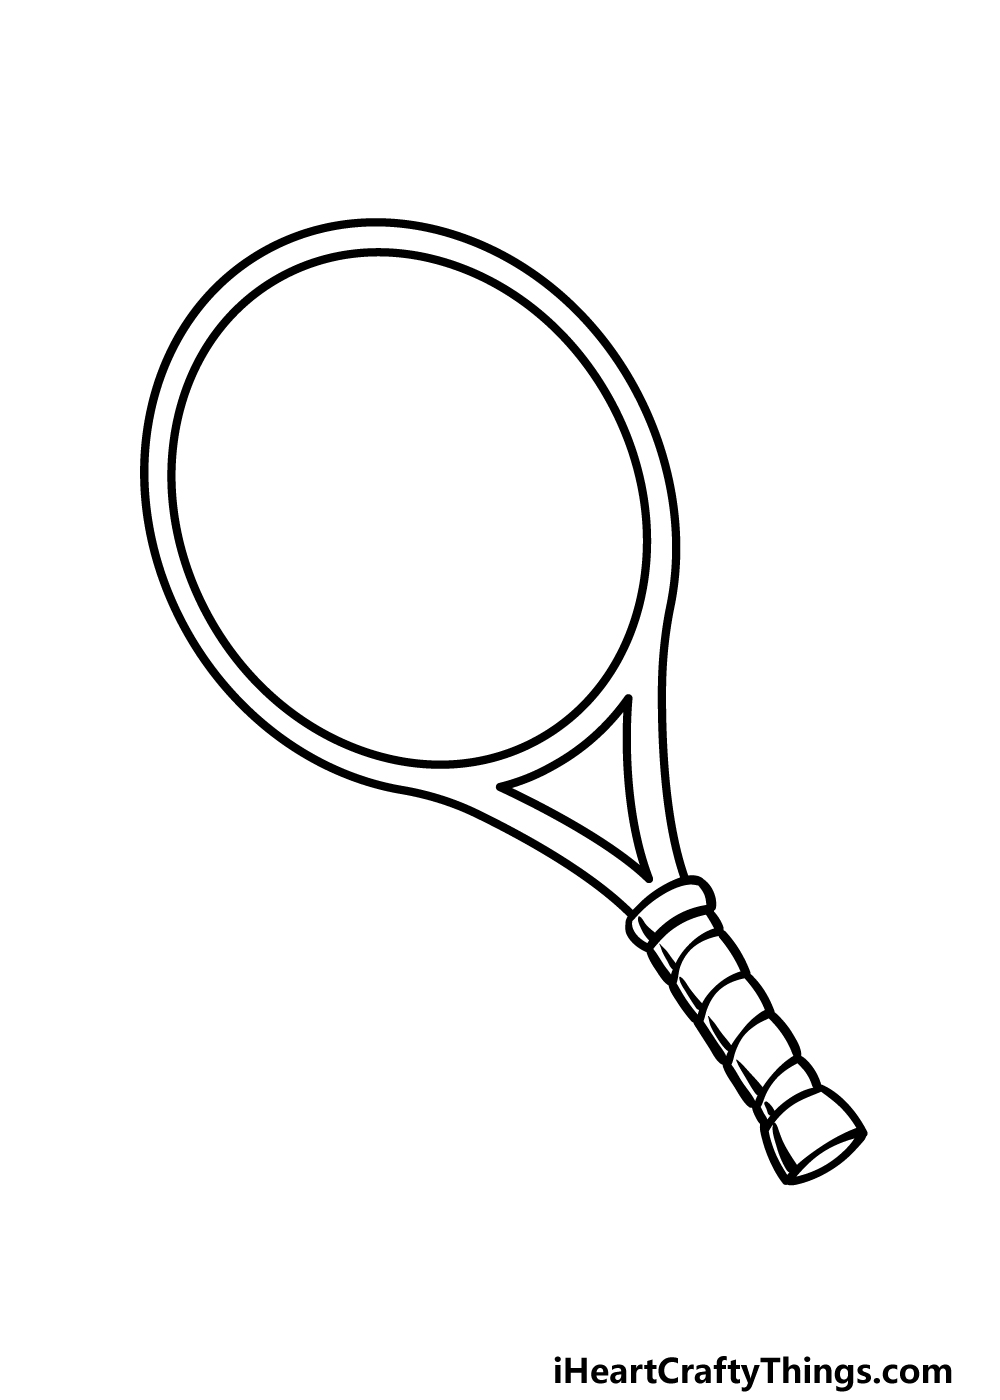 Tennis Racket Drawing - How To Draw A Tennis Racket Step By Step